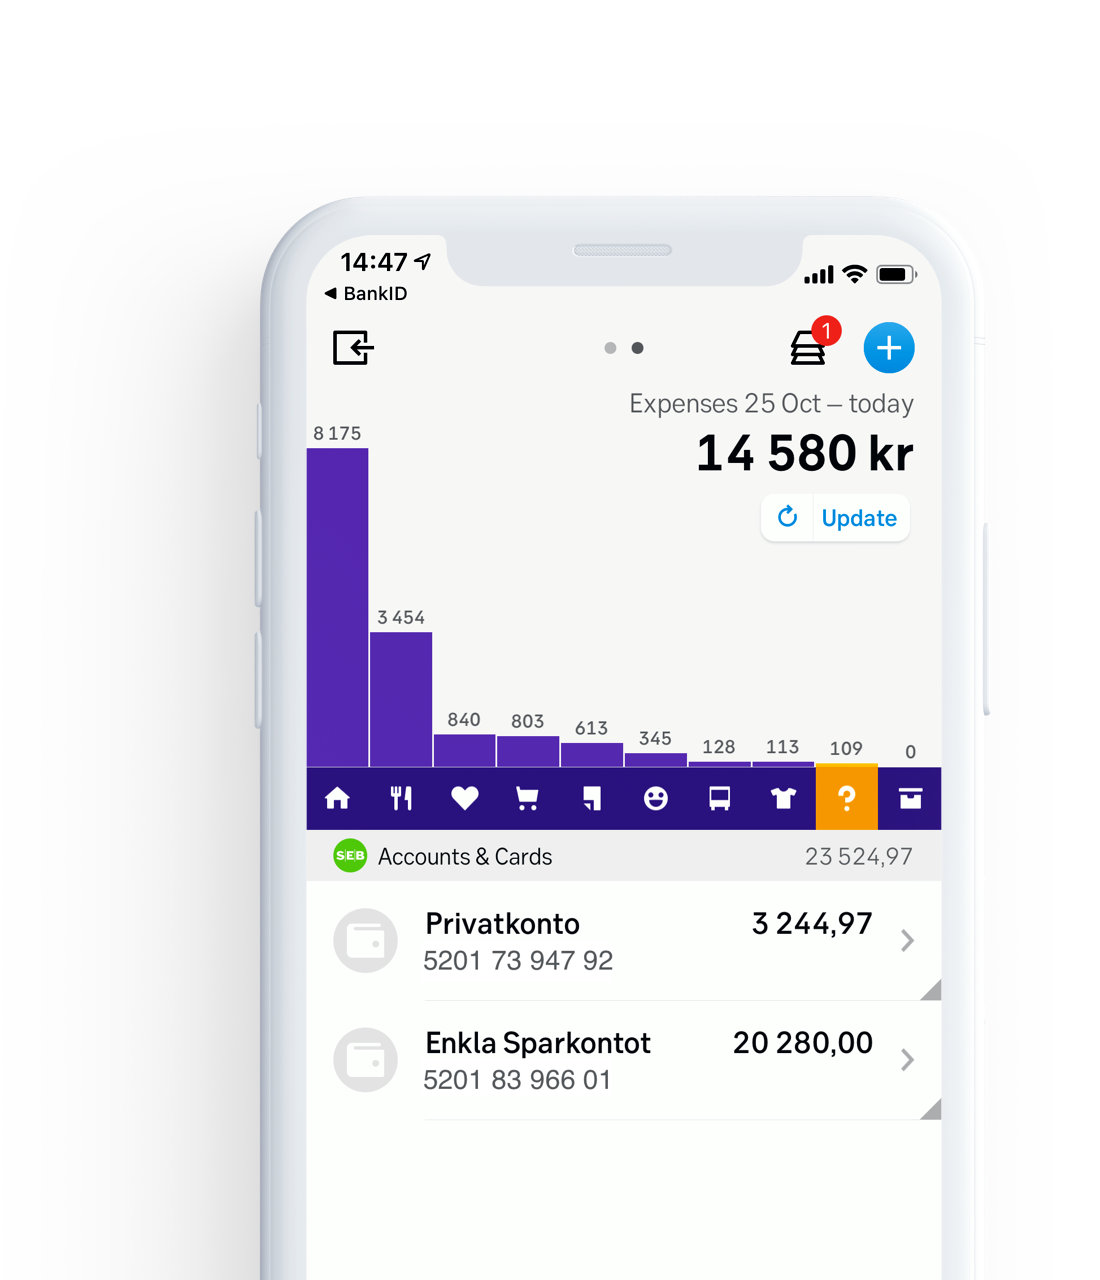 Major Nordic bank SEB developed its own app based on Tink’s platform, using data enrichment to categorise and display transactions in a clear format for their customers. 

SEB's app is now the most popular channel for private customers in Sweden, with more than 200 million visits every year.